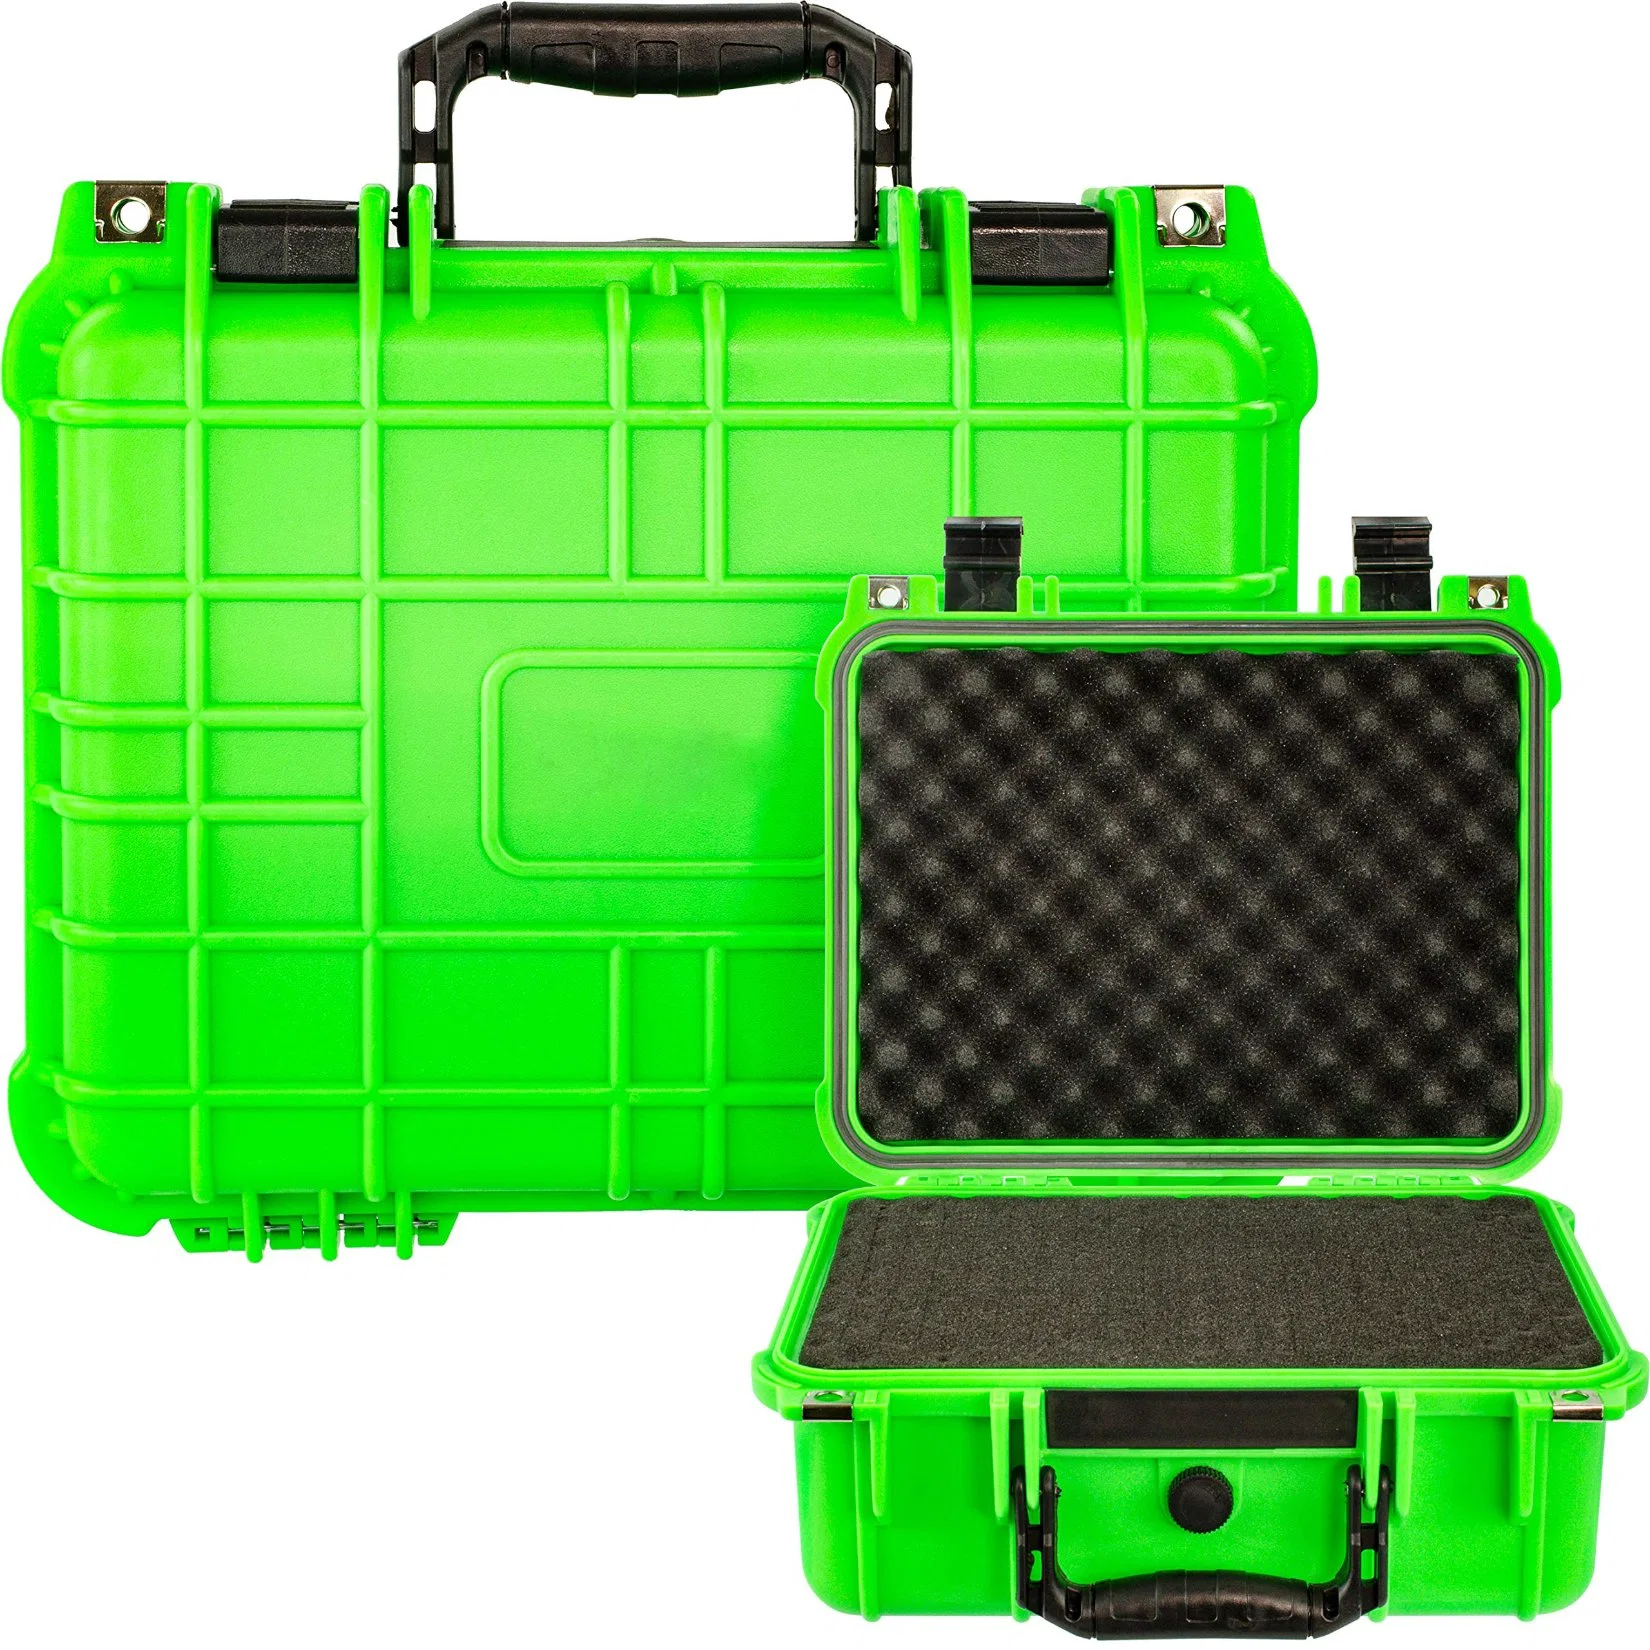 Hard Case Waterproof Plastic Case Protective Gear and Camera Hard Case Water Shock Proof with Foam